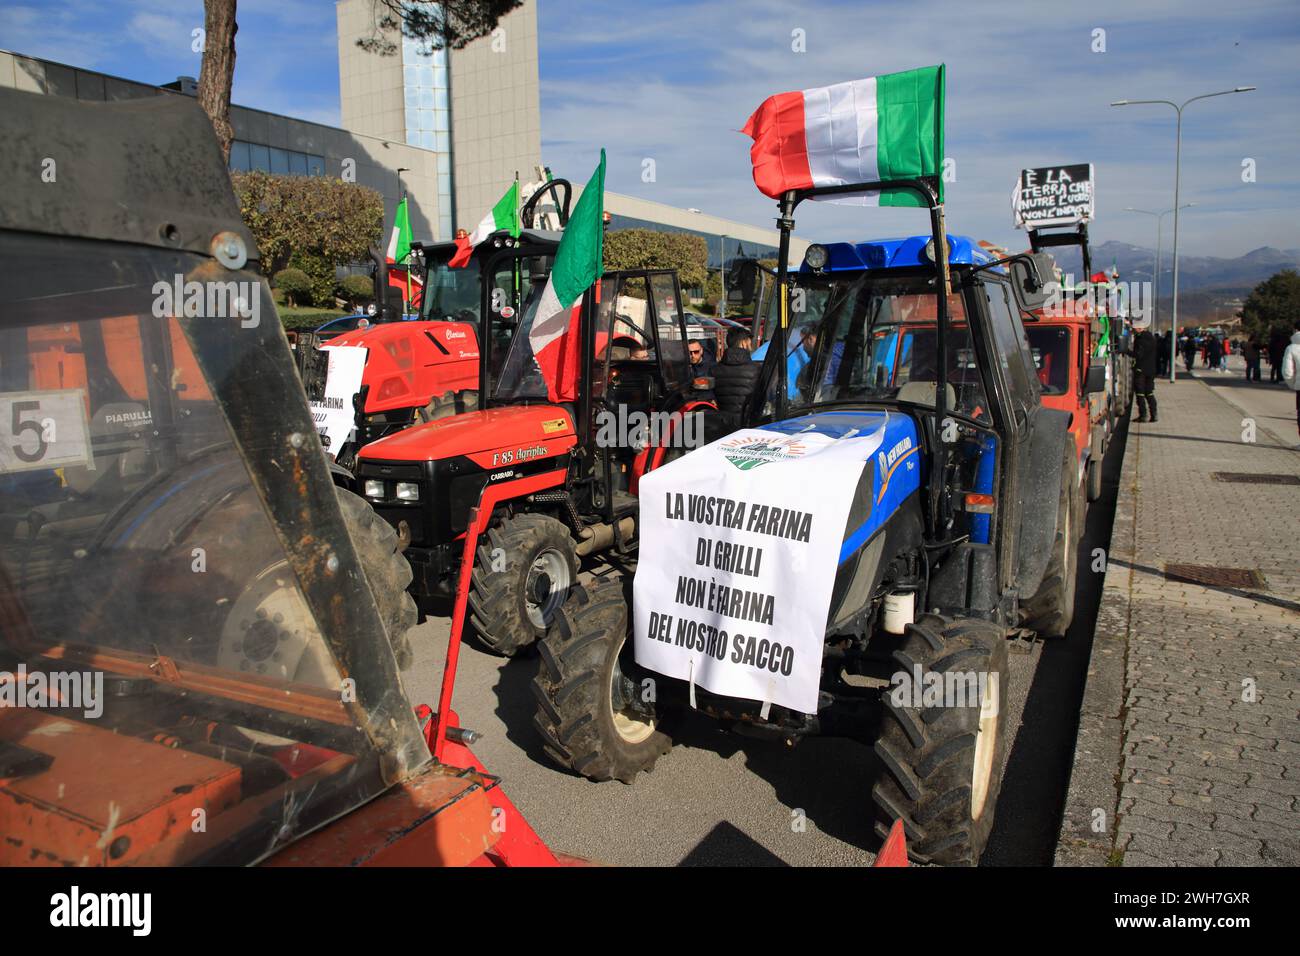 February 7, 2024, Avellino, Campania/Avellino, Italy: Avellino, Italy - February 07, 2024: On the morning of February 04 in Avellino, farmers from various municipalities in the province of Avellino with their tractors went to the headquarters of the Offices of the Campania Region, to demonstrate their disappointment against the European Community's agricultural policies. A meeting with local authorities to express their opposition to what Italy and Europe is about to apply as agricultural policies.From 22 January 2024 throughout Italy there are protests from farmers who with their tractor Stock Photo